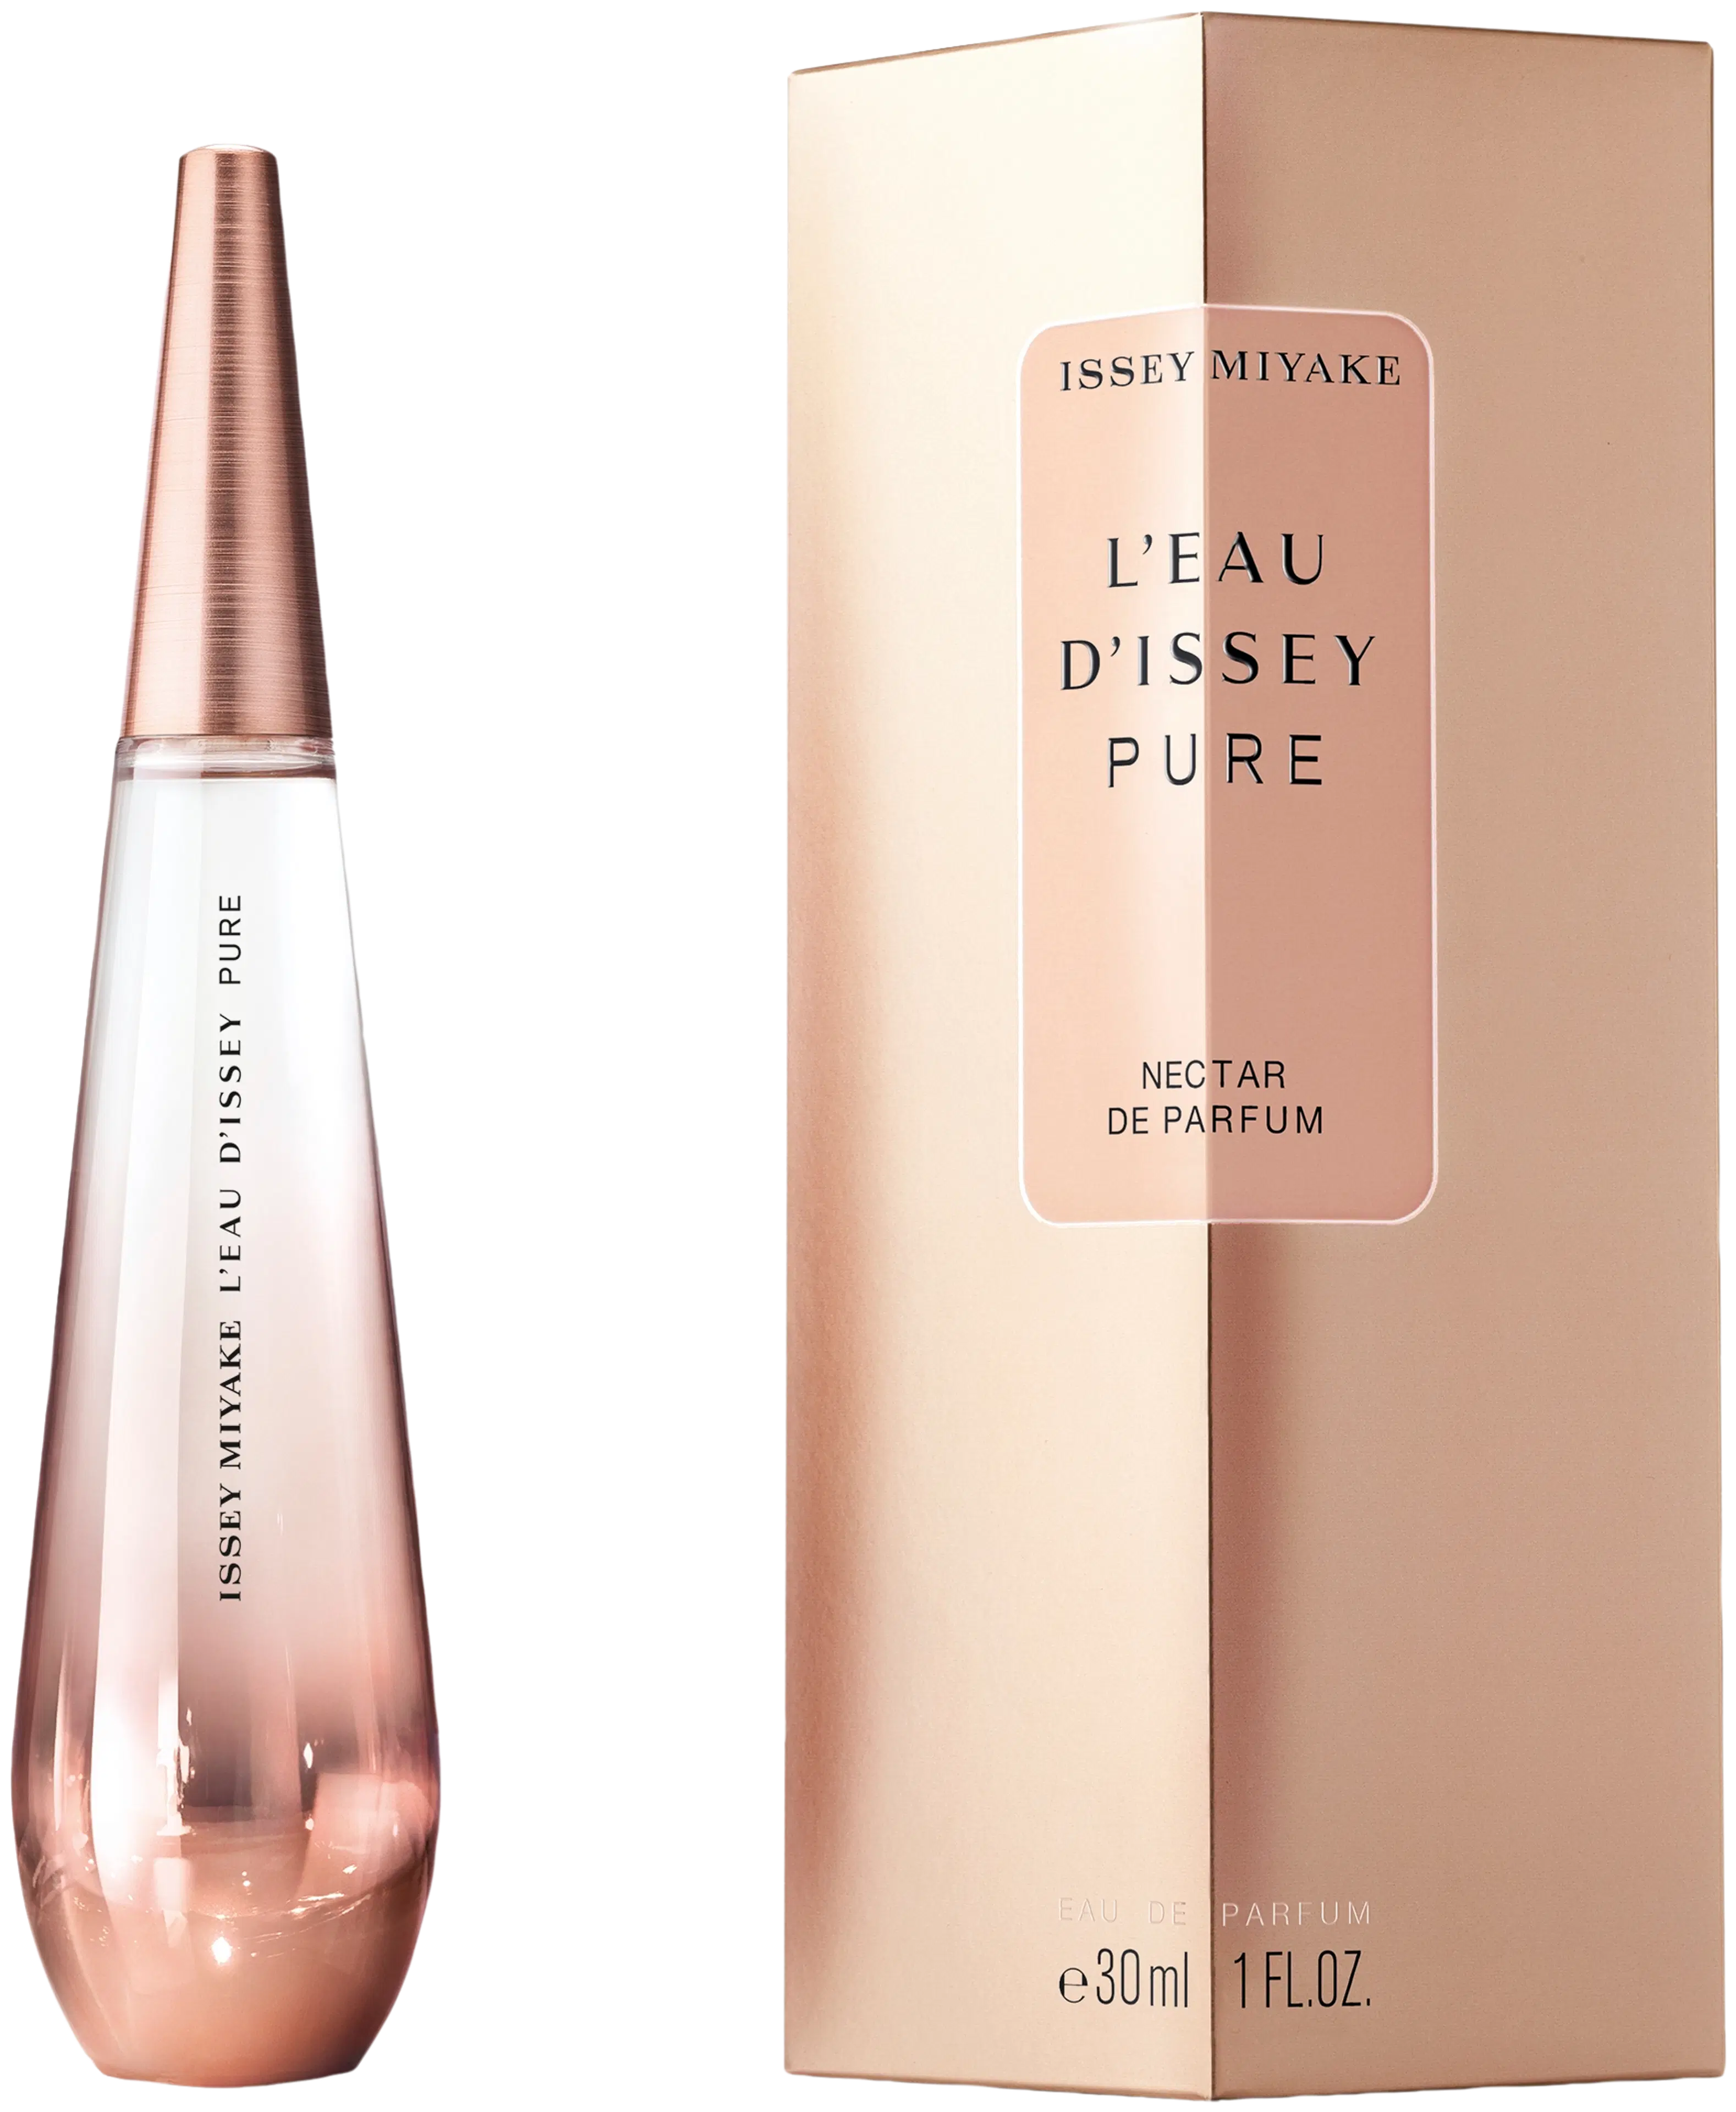 Issey Miyake L'Eau d'Issey Pure Nectar EdP 30ml